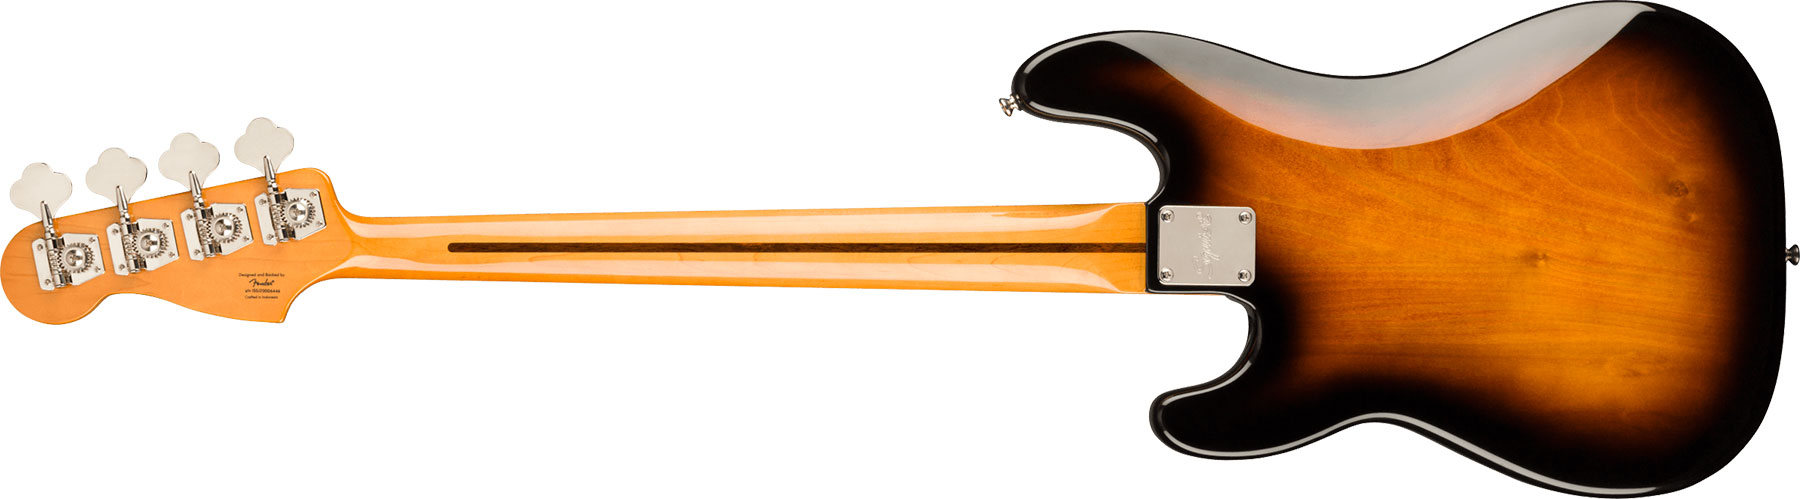 Squier Precision Bass Late '50s Classic Vibe Fsr Ltd Mn - 2-color Sunburst - Solid body electric bass - Variation 1